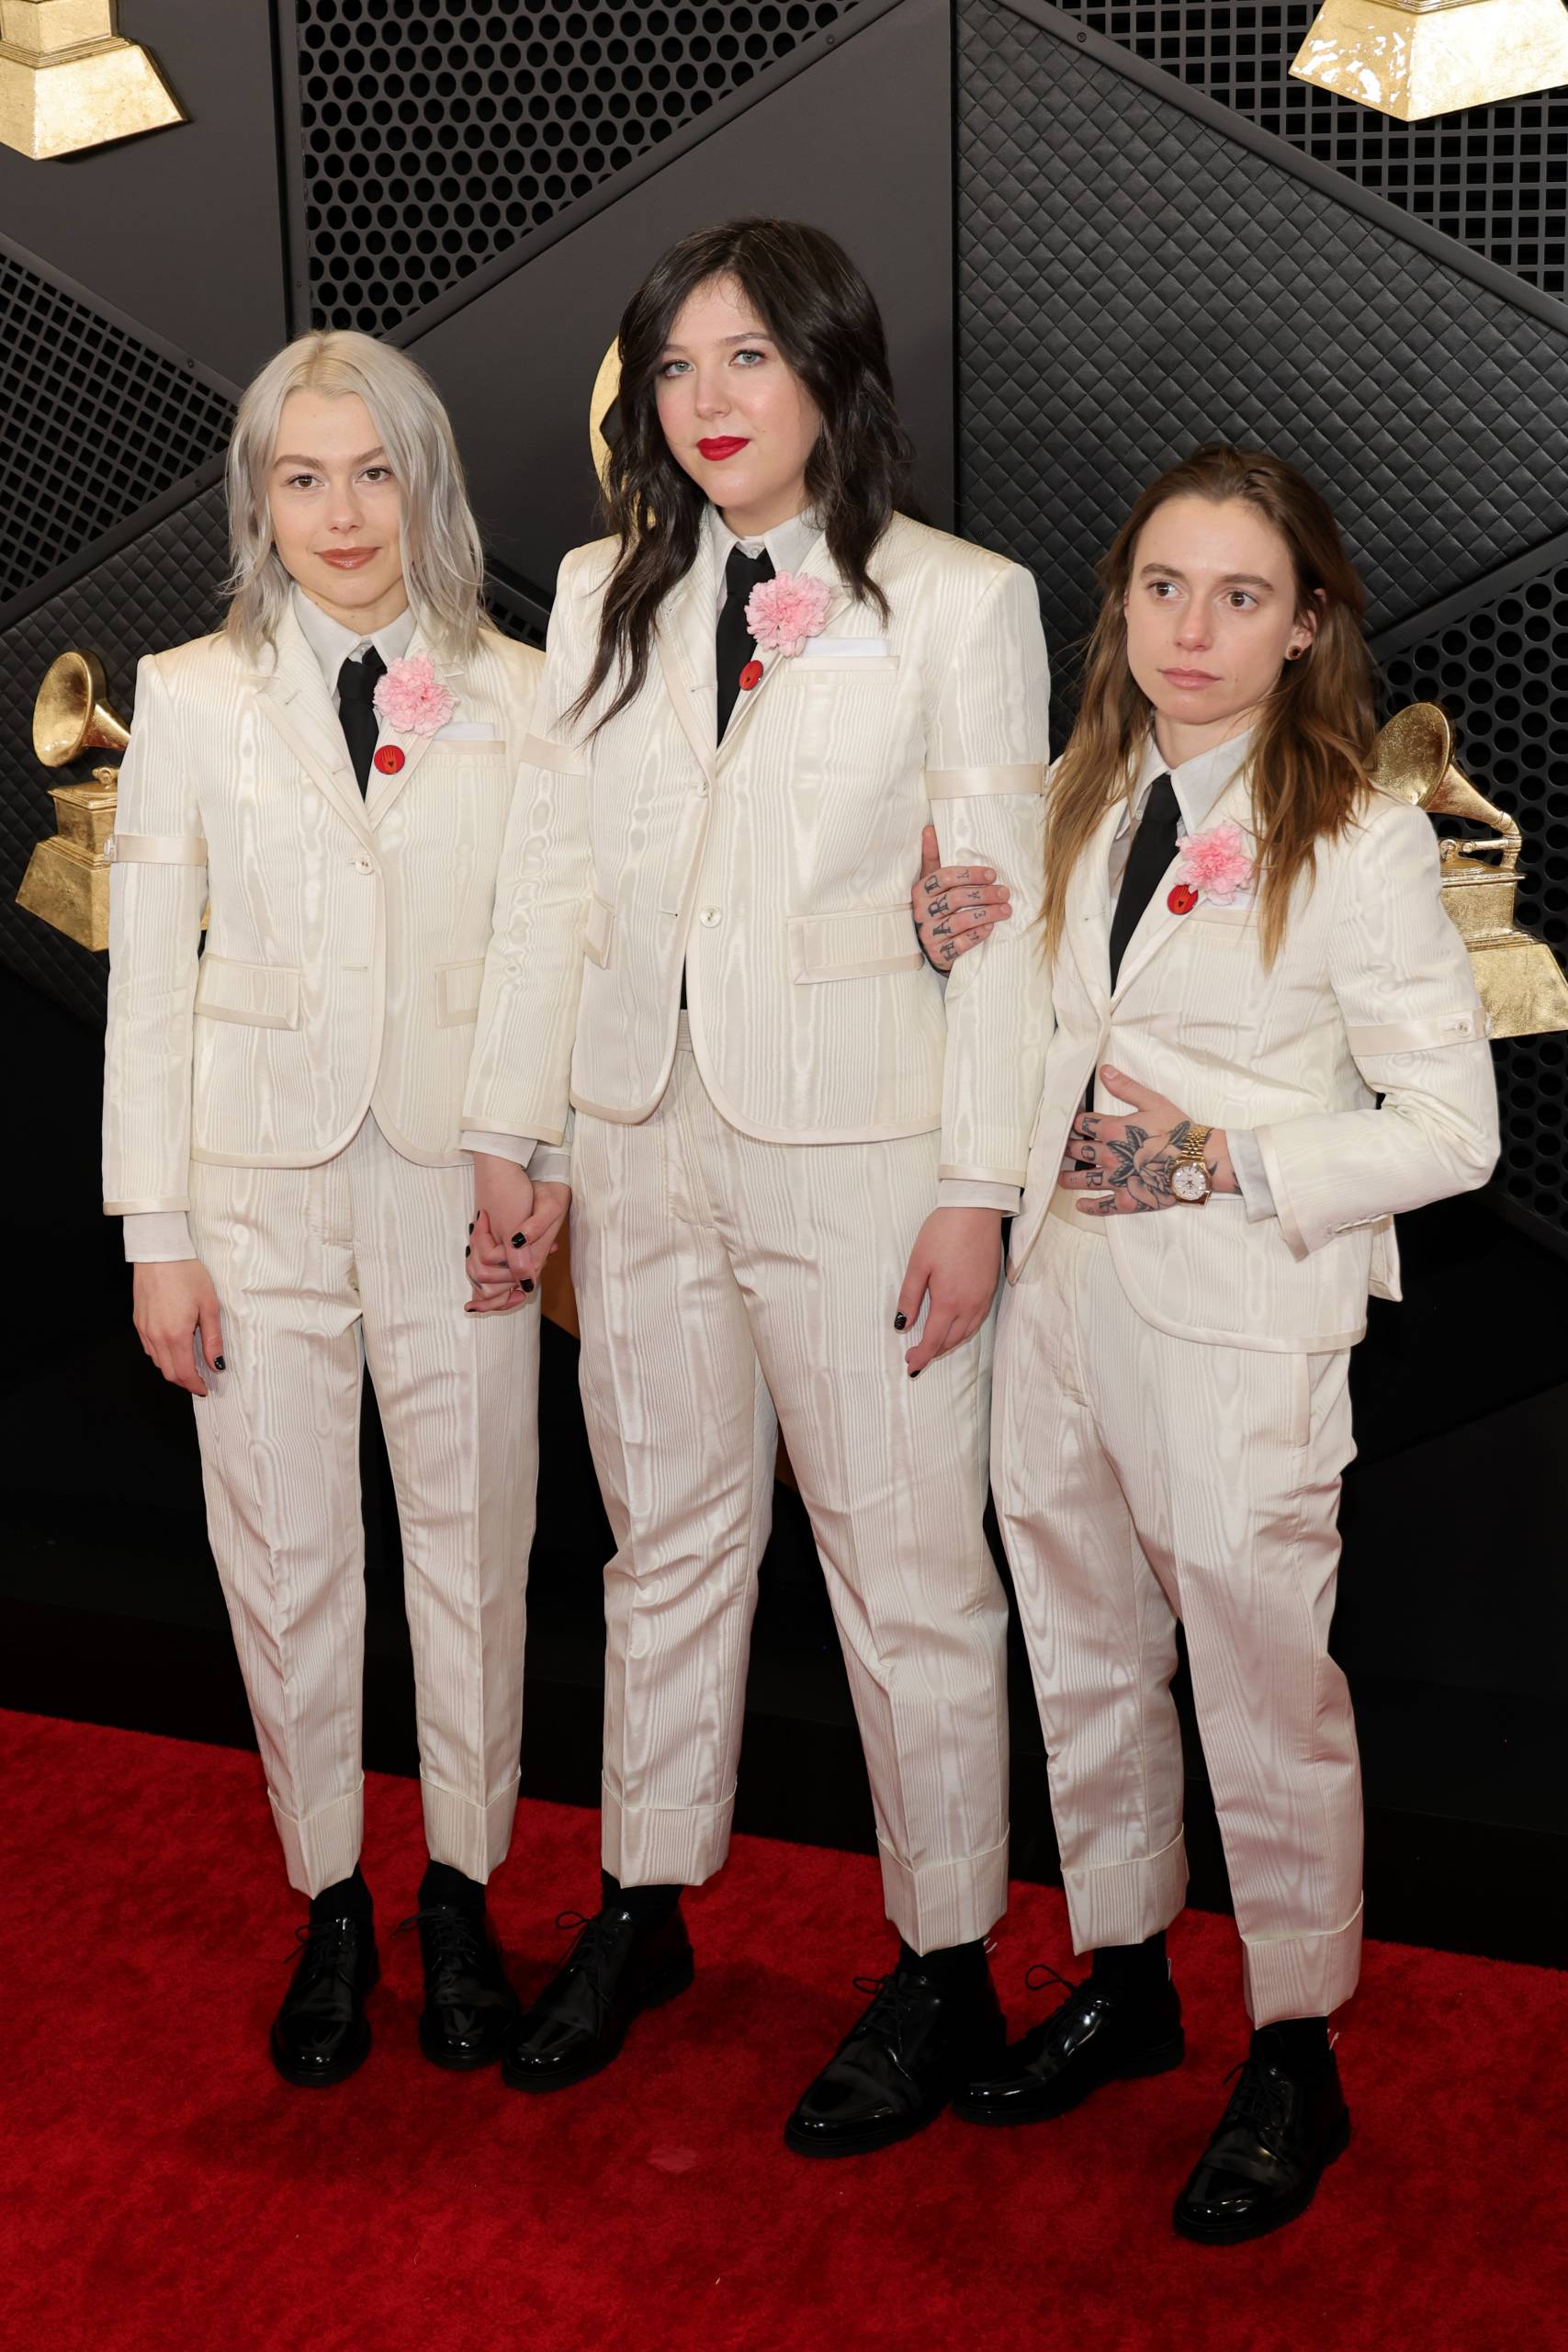 Three young women in matching white suits and red ties.